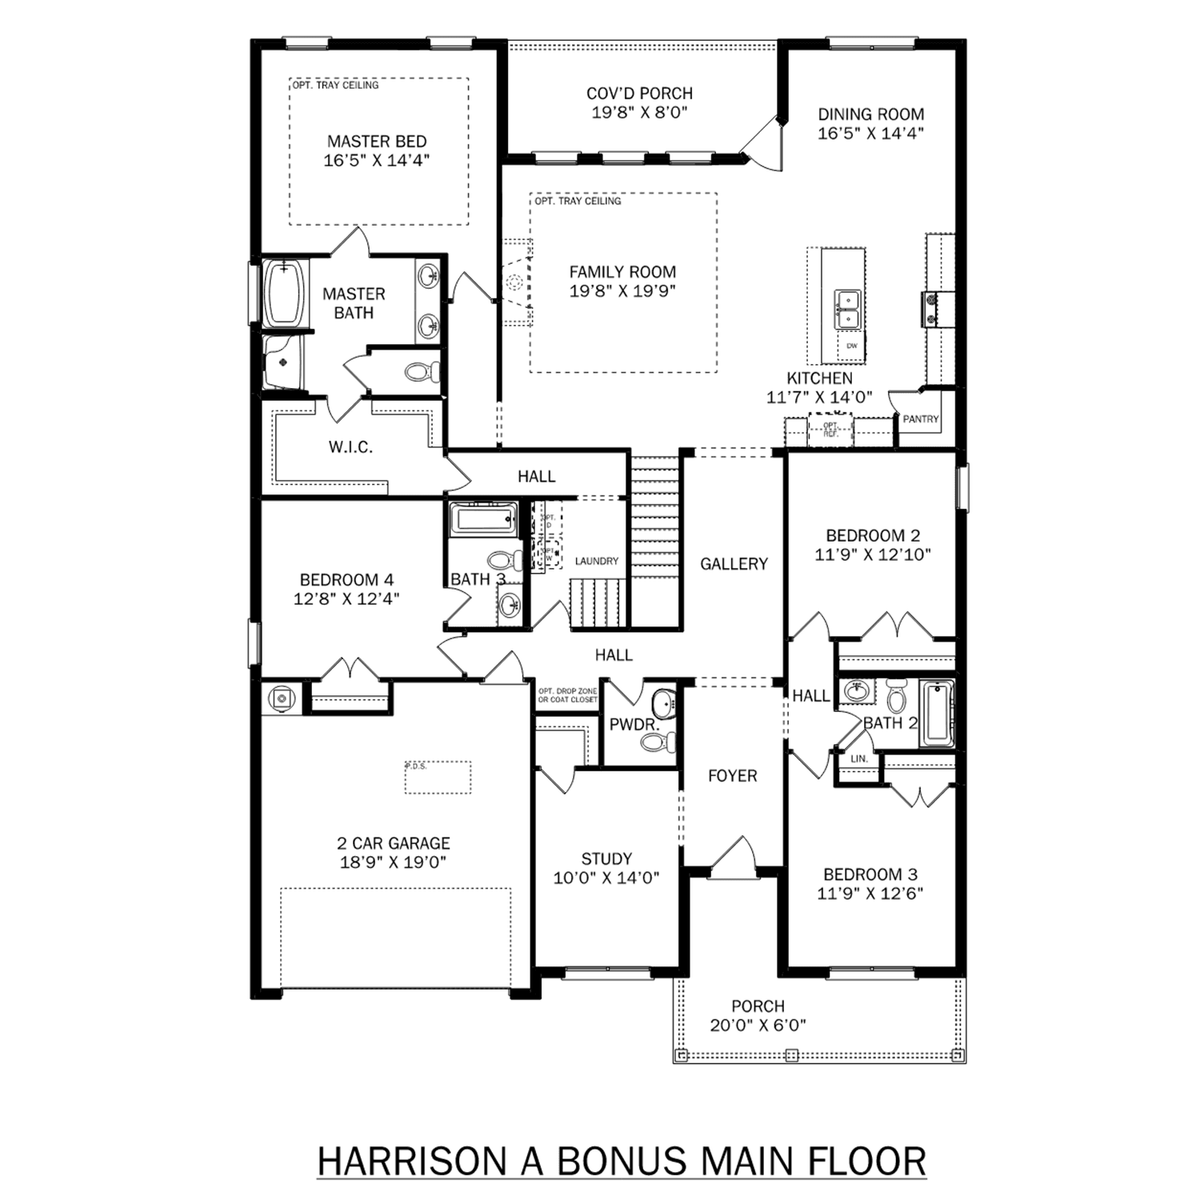 1 - The Harrison with Bonus floor plan layout for 605 Ronnie Drive SE in Davidson Homes' Cain Park community.